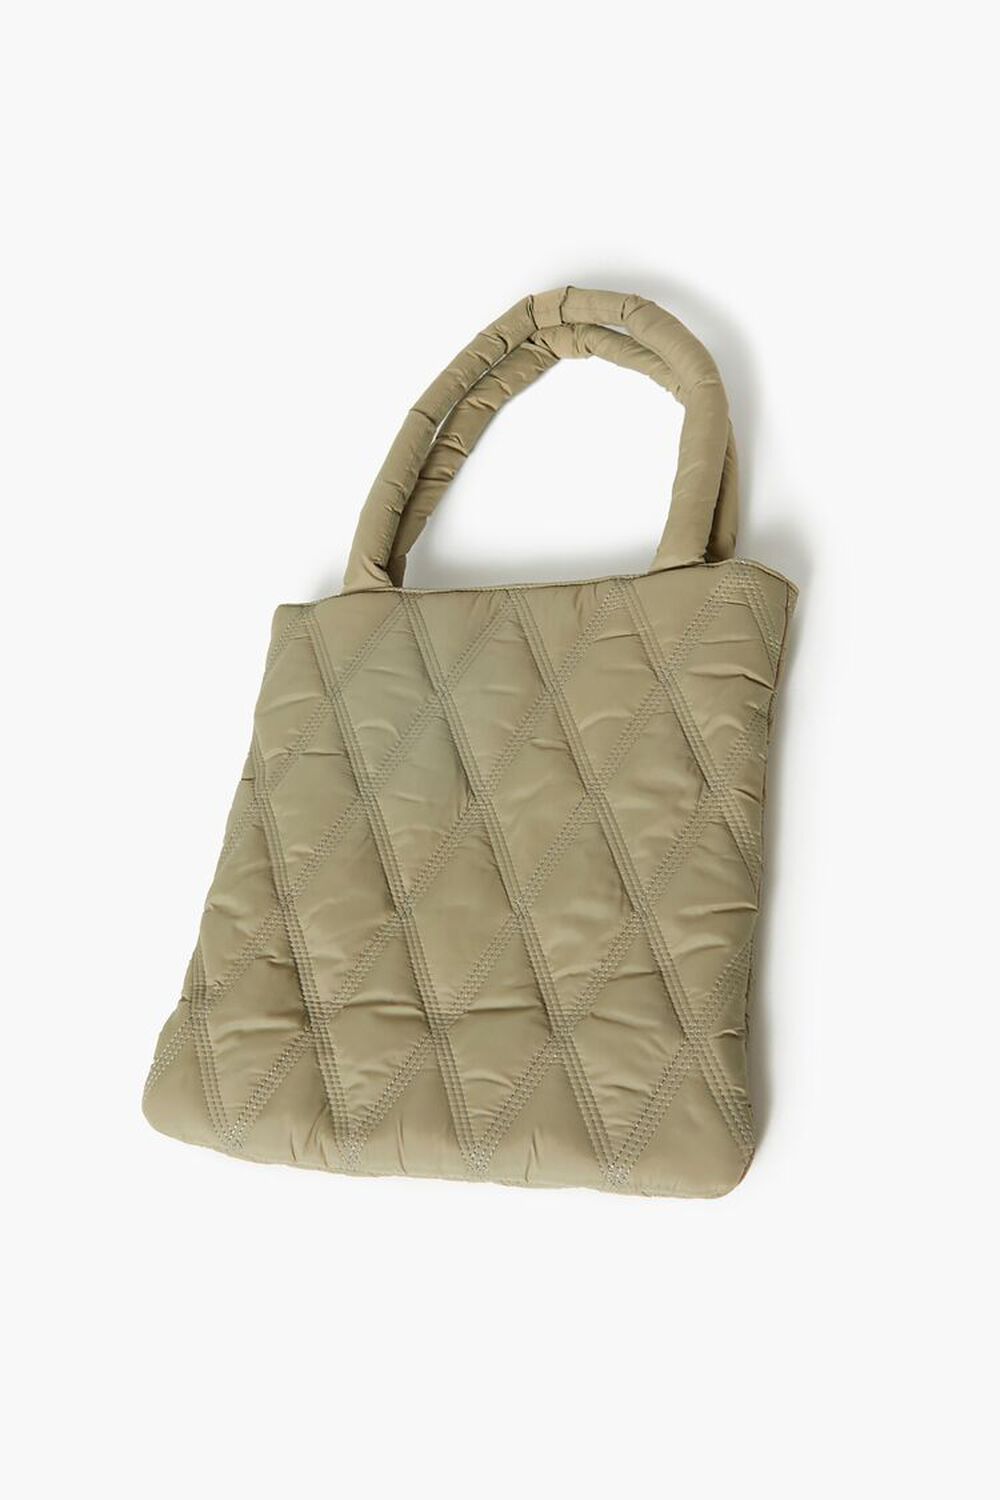 STAND STUDIO Quilted chain-link Tote Bag - Farfetch